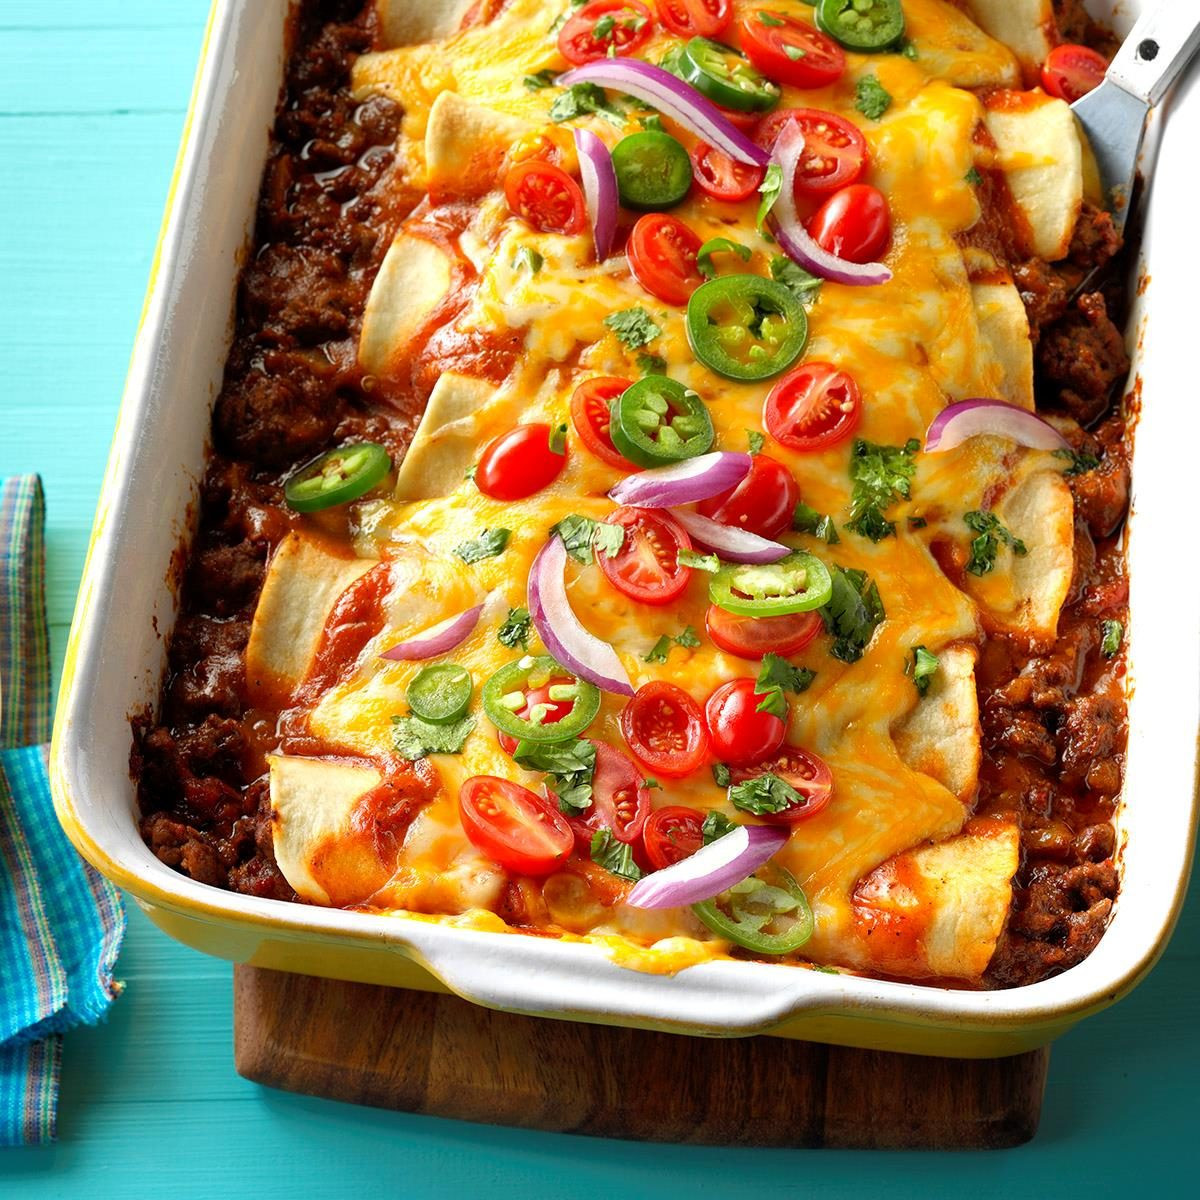 Best 24 Mexican Food Ideas for Dinner Party - Home, Family, Style and